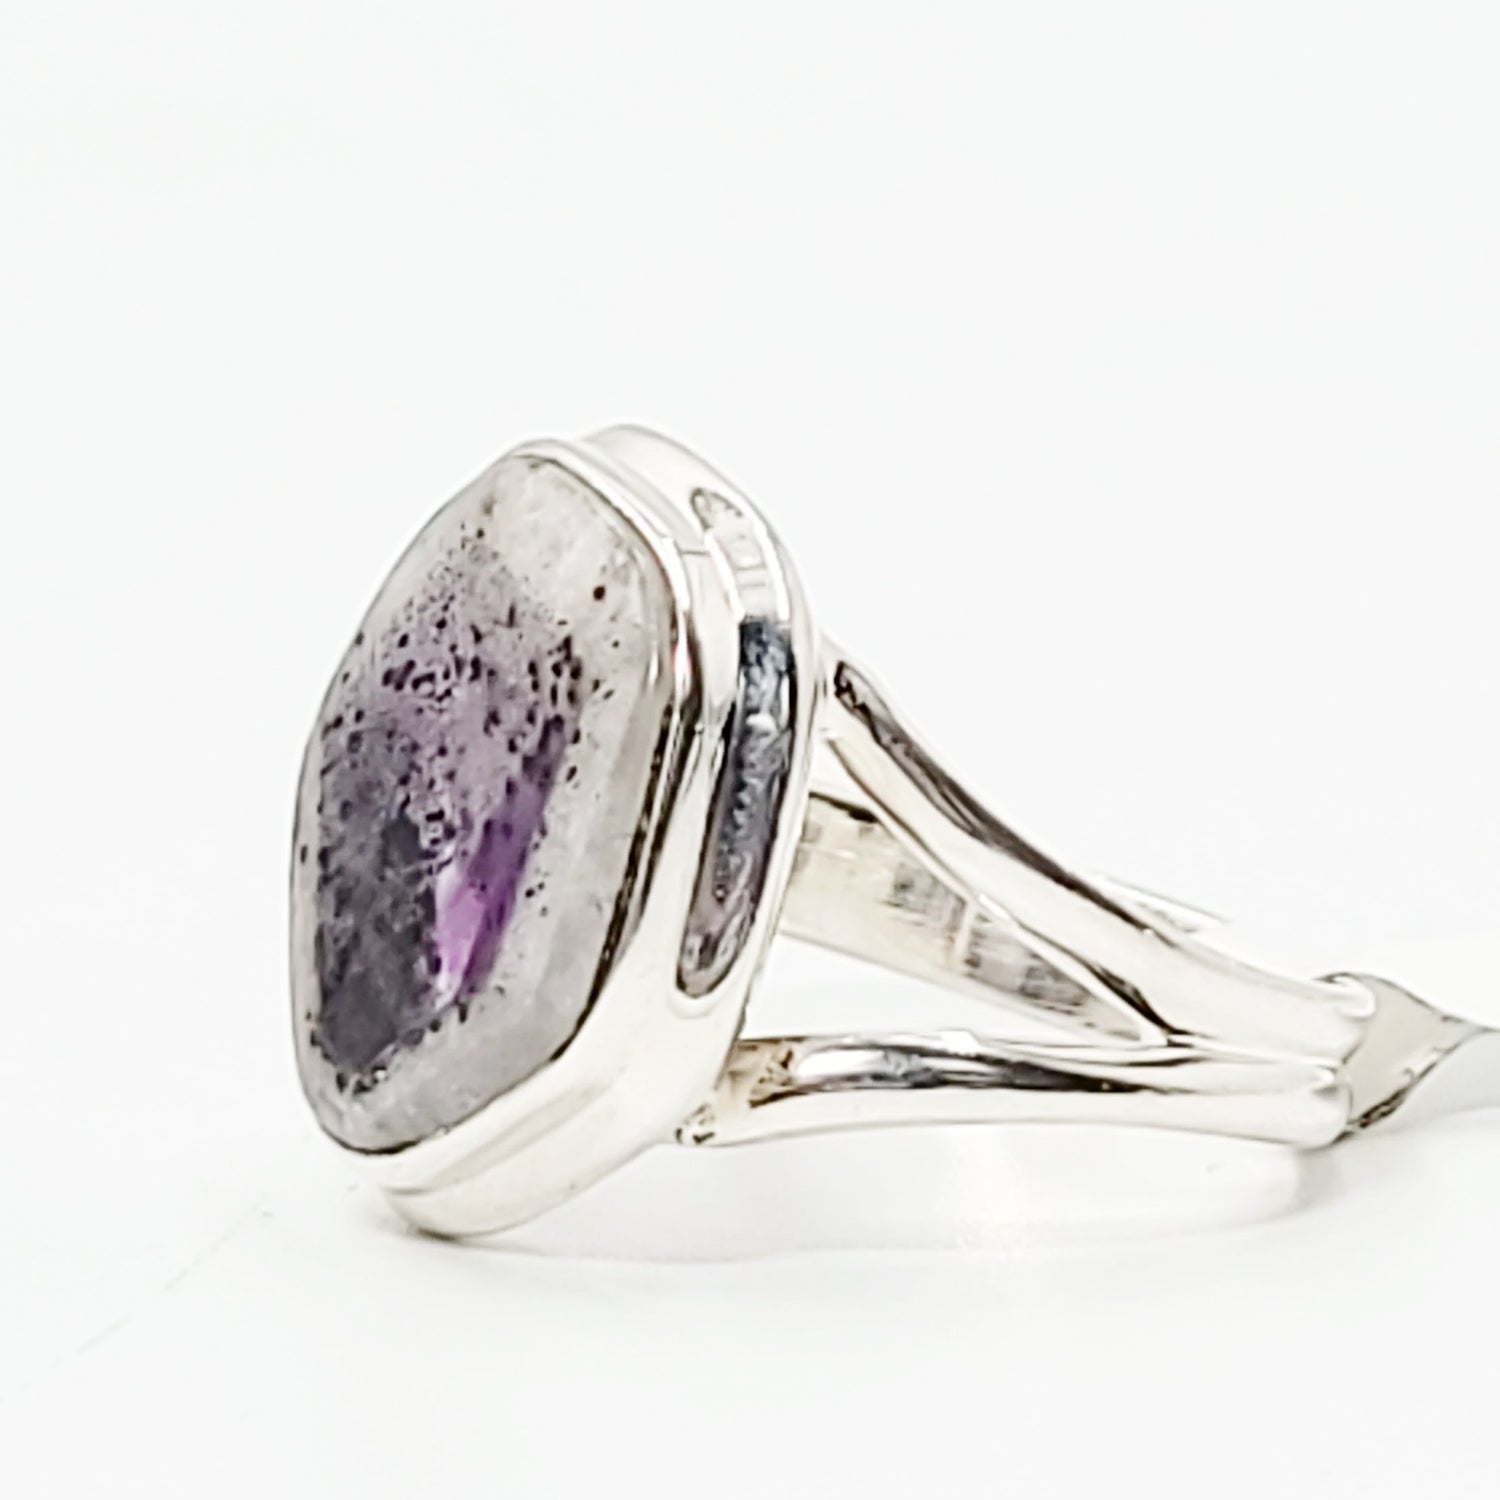 Auralite-23 Ring Sterling Silver Band Auralite 23 - Elevated Metaphysical